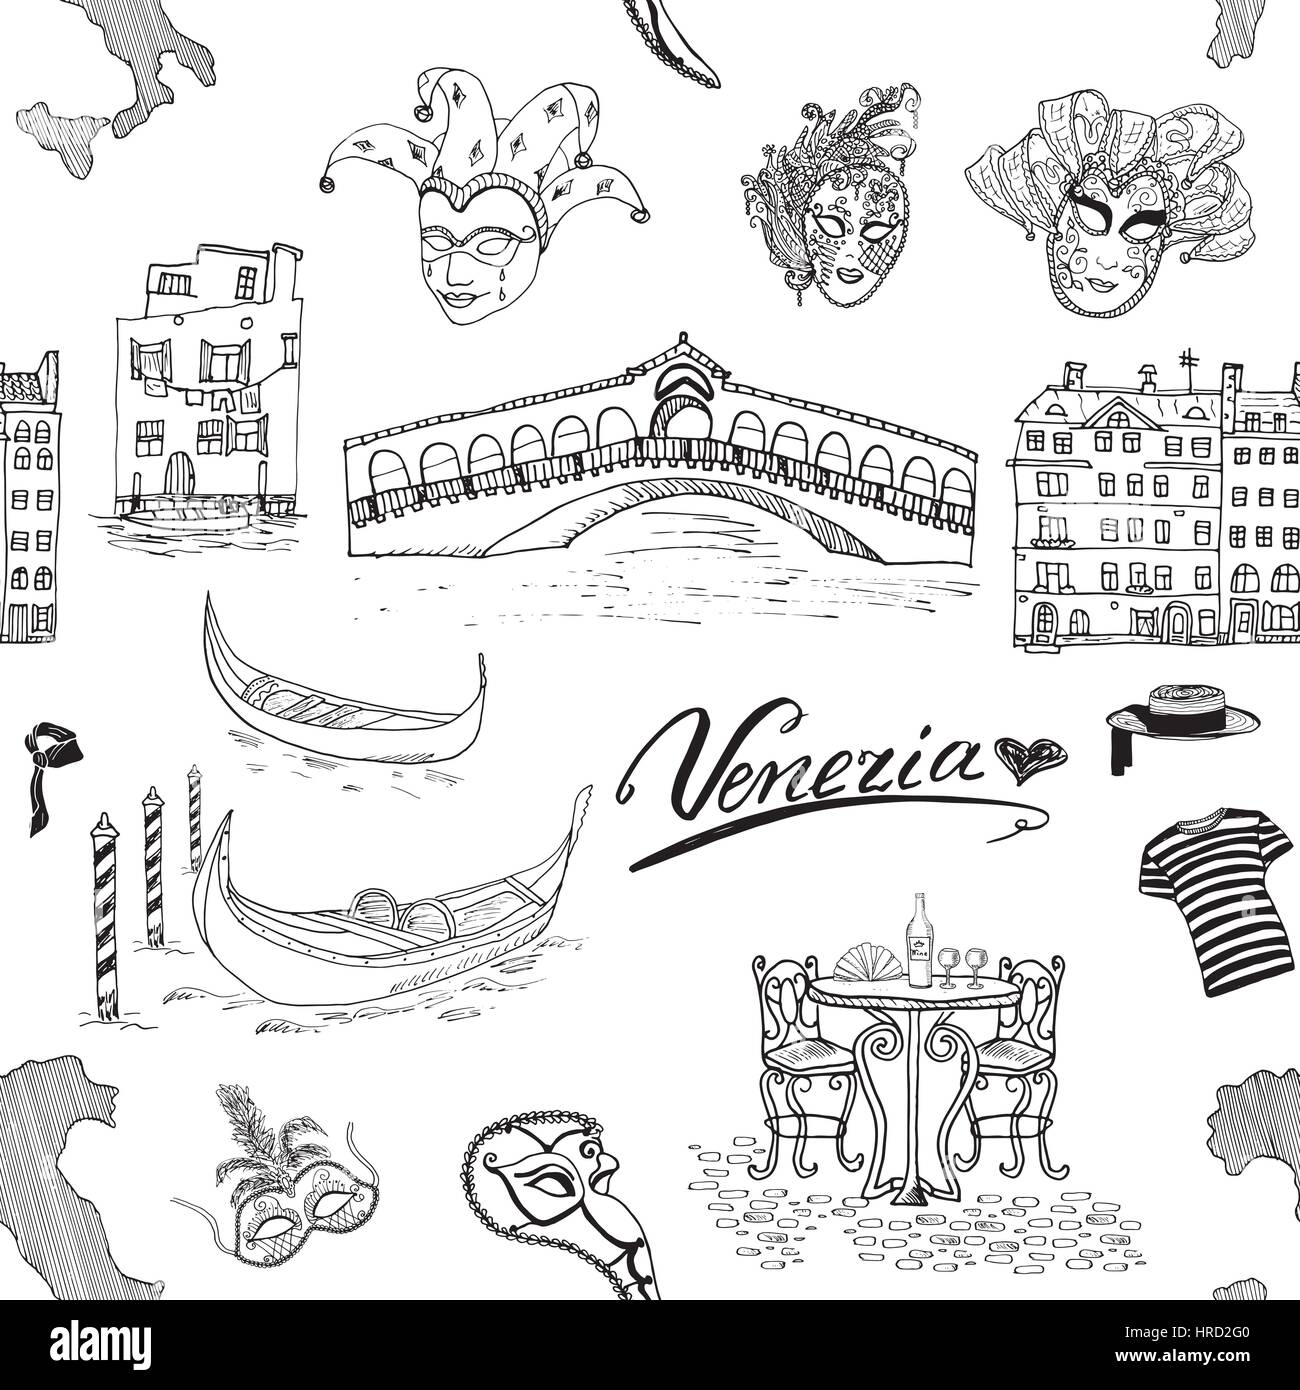 Venice Italy seamless pattern. Hand drawn sketch with map of Italy, gondolas, gondolier clothes, carnival venetian masks, houses, market bridge, cafe  Stock Vector